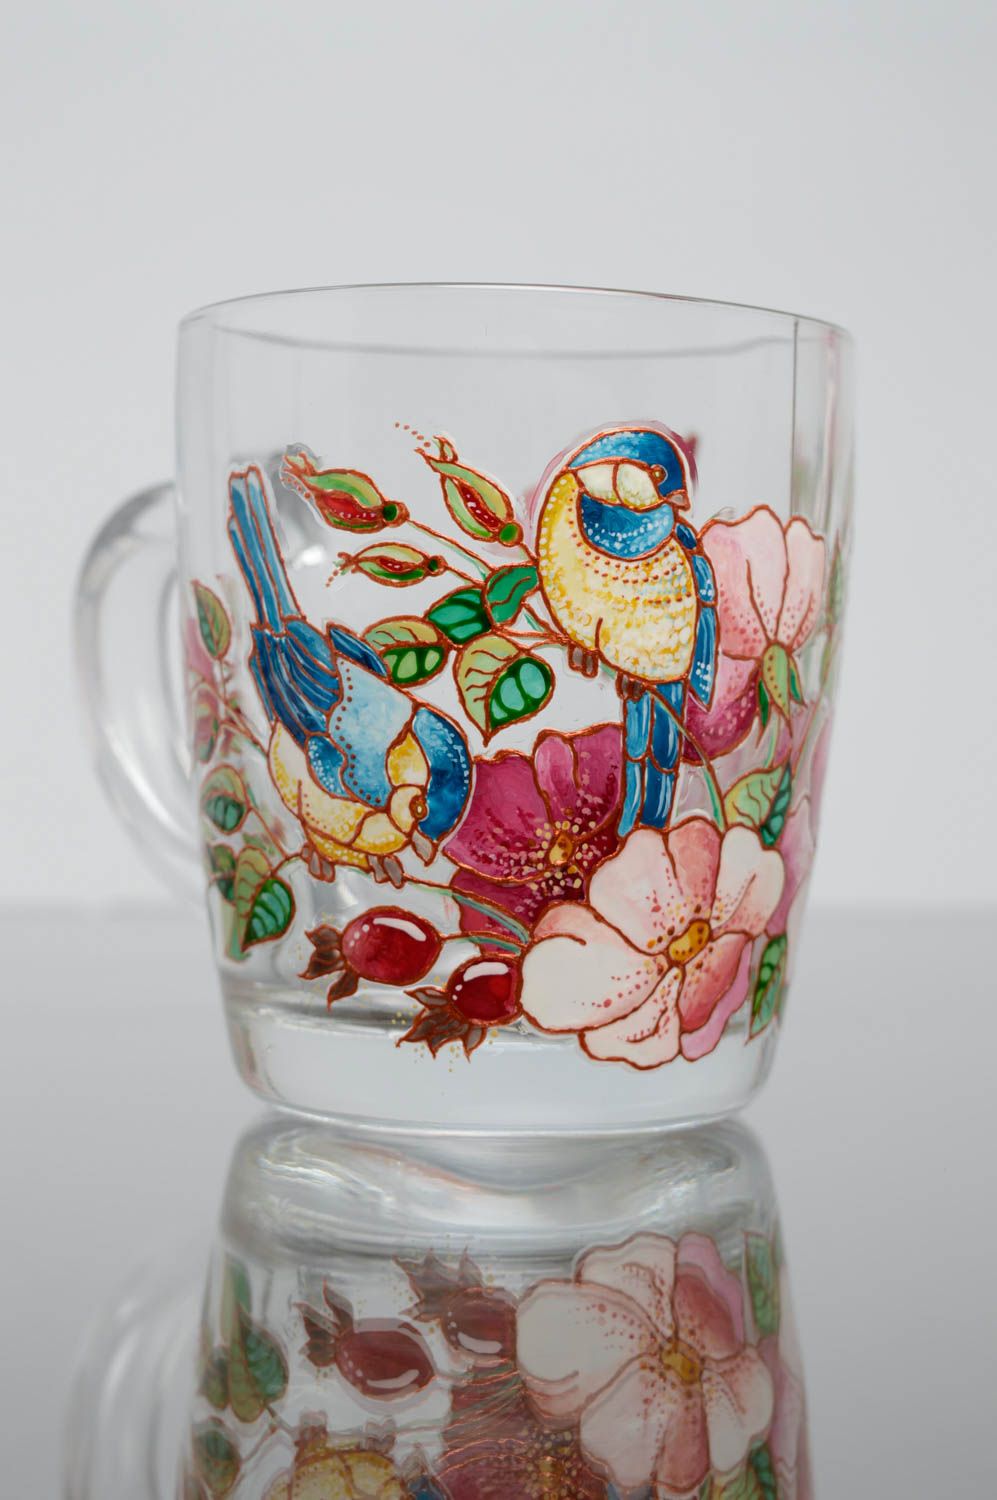 Stained tea cup with handle and hand-painted floral pattern with bird